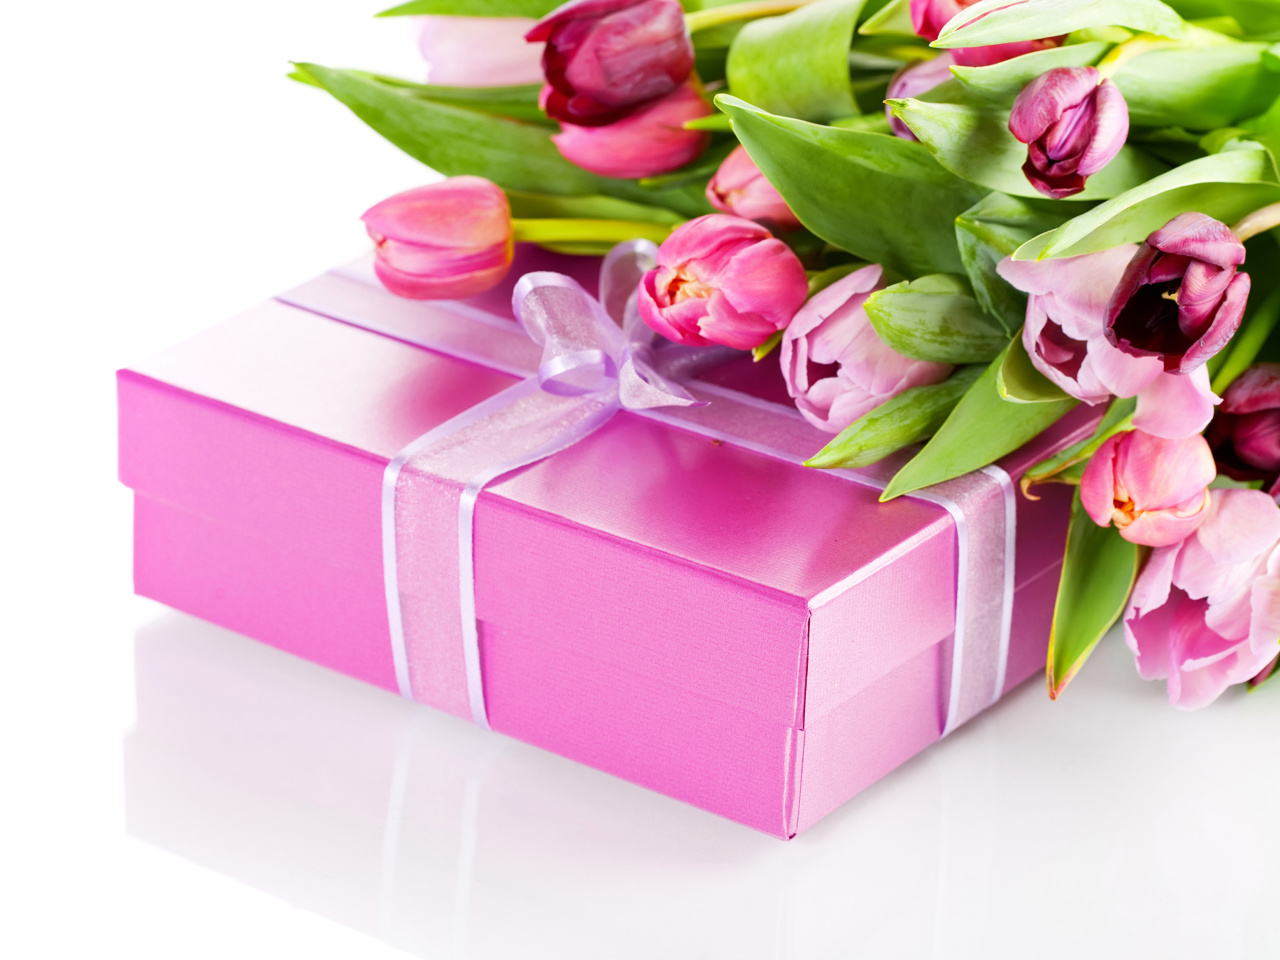 Das Pink Tulips and Gift Wallpaper 1280x960